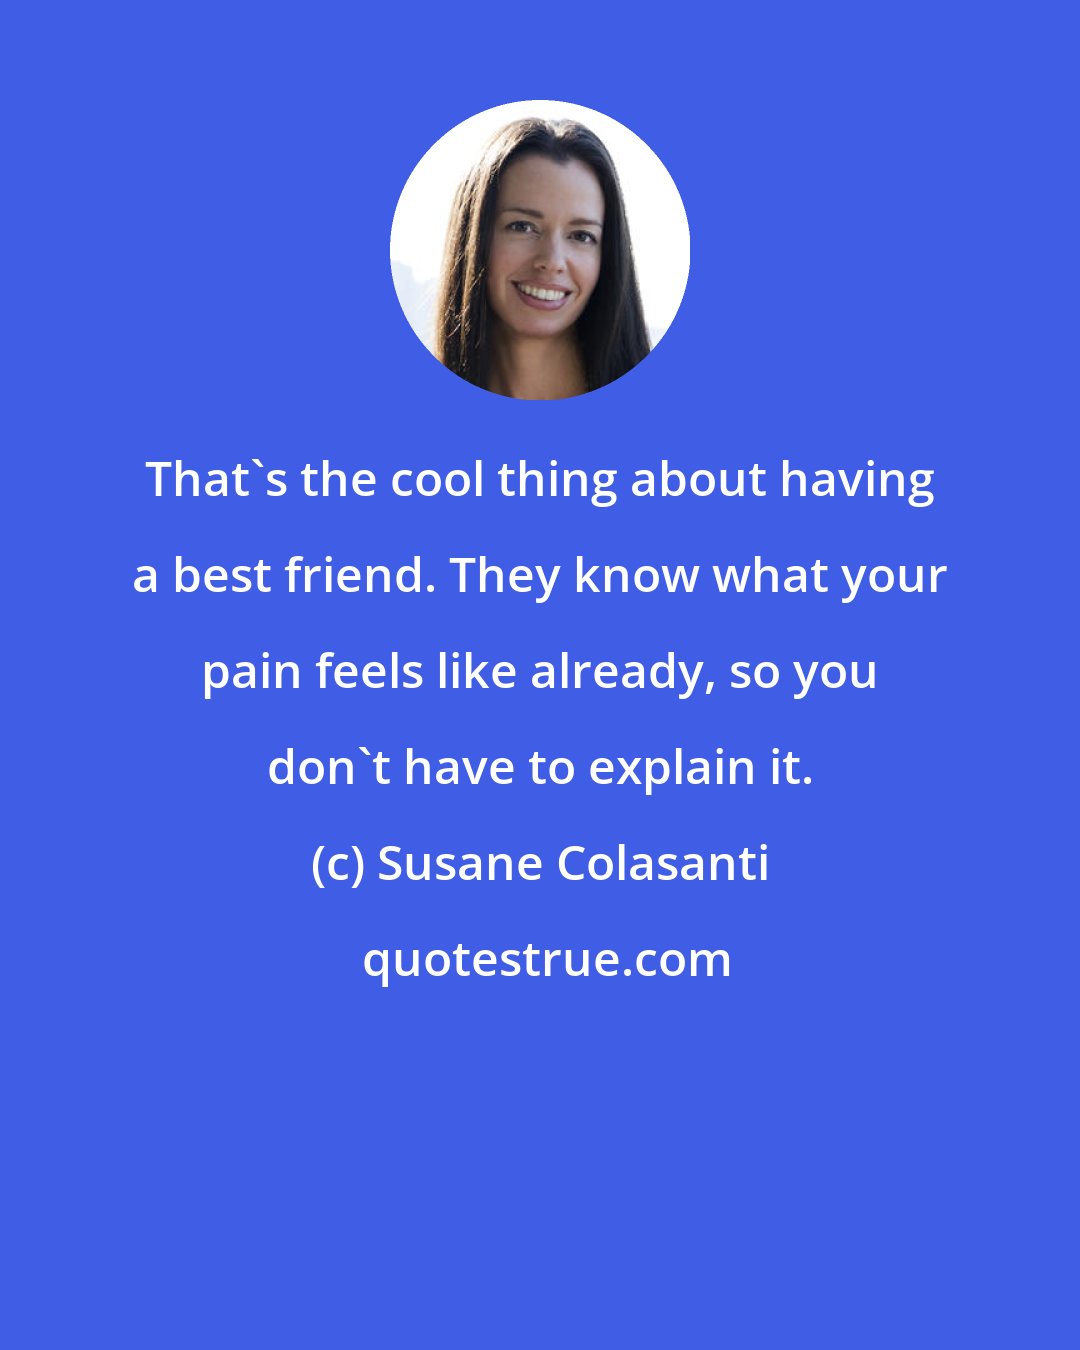 Susane Colasanti: That's the cool thing about having a best friend. They know what your pain feels like already, so you don't have to explain it.